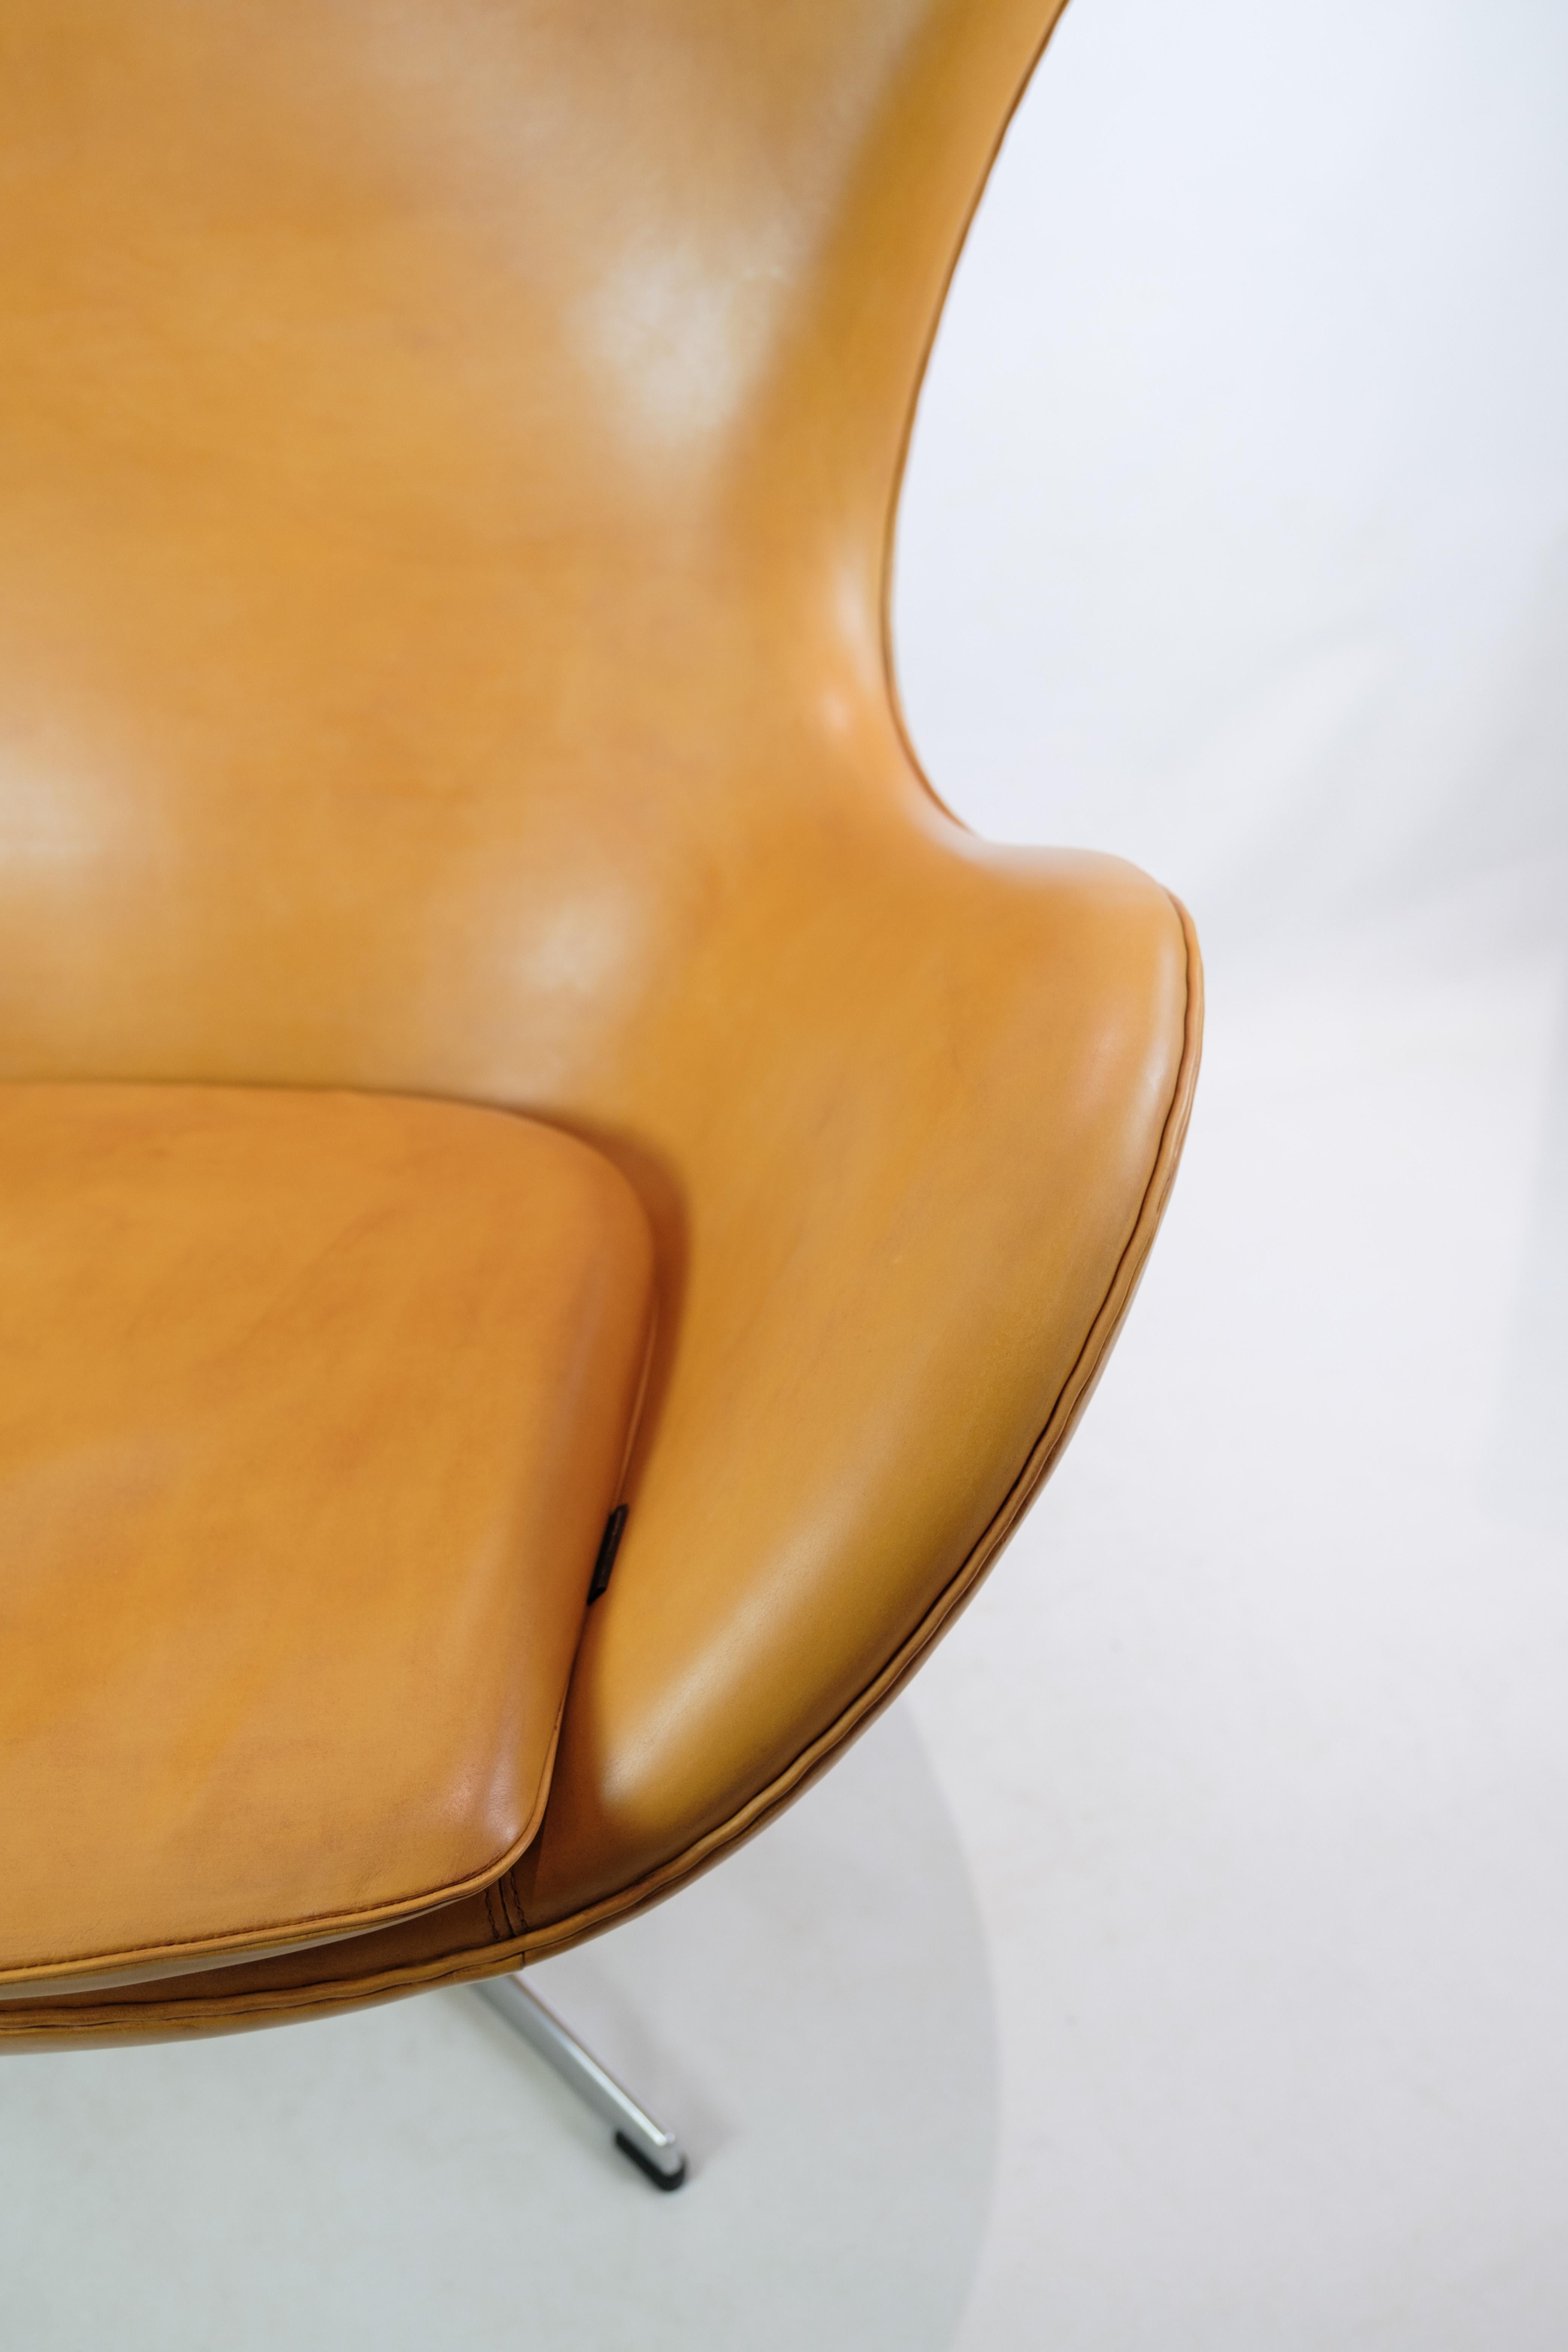 Mid-Century Modern The Egg Model 3316 Made In Cognac Elegance Leather By Arne Jacobsen From 2000s For Sale